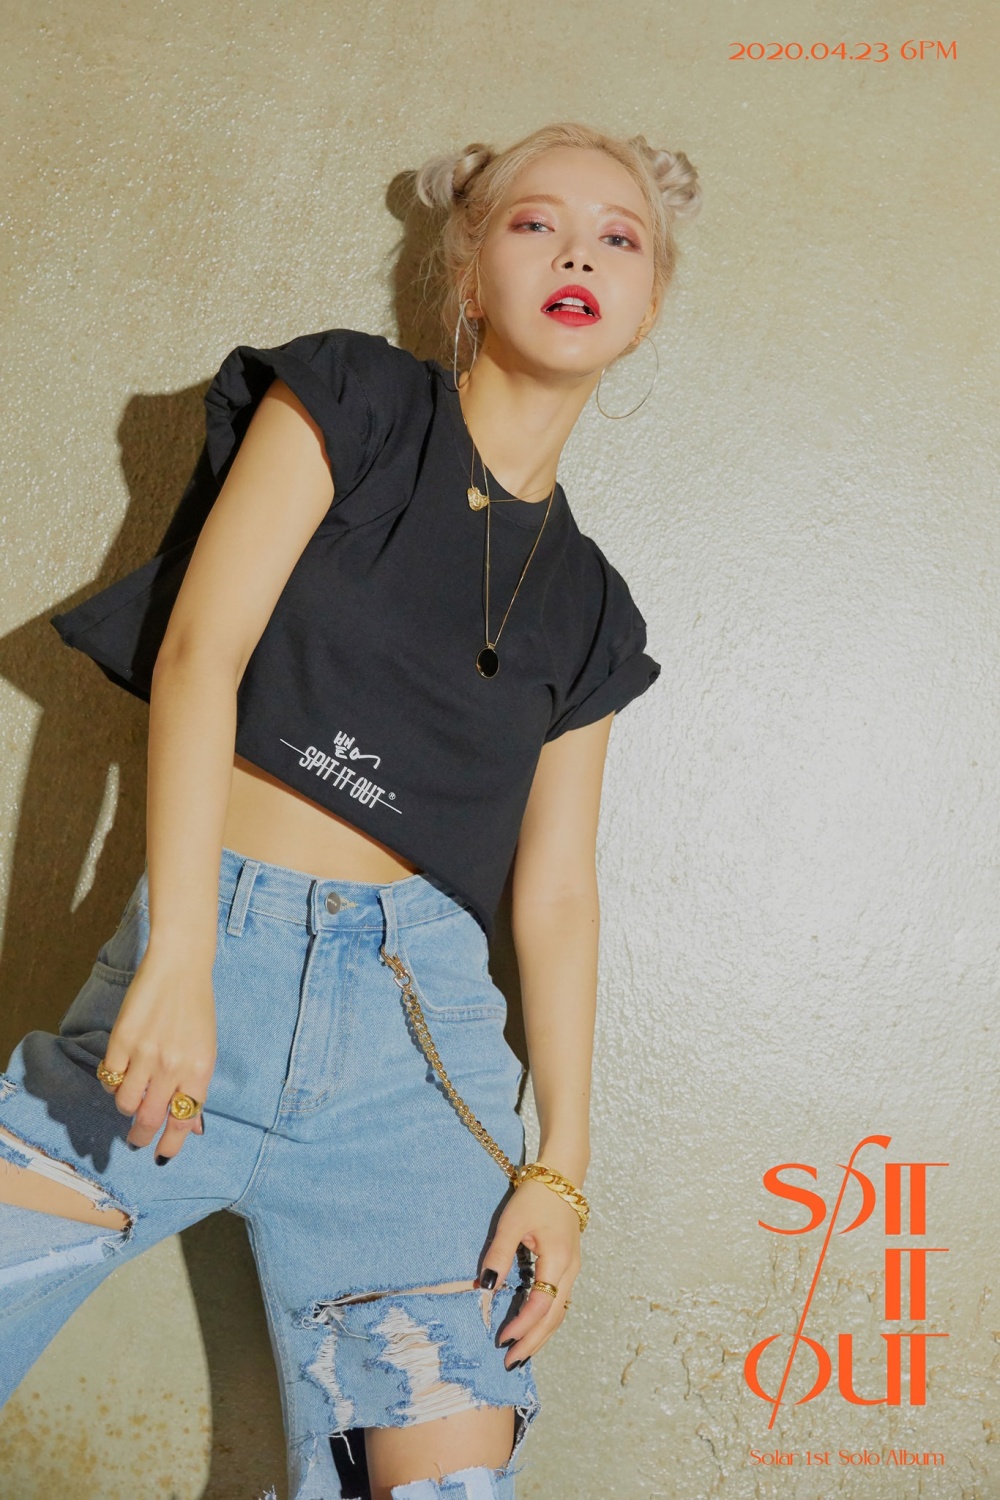 WATCH: MAMAMOO’s Solar is Cool and Edgy in “SPIT IT OUT” Teasers